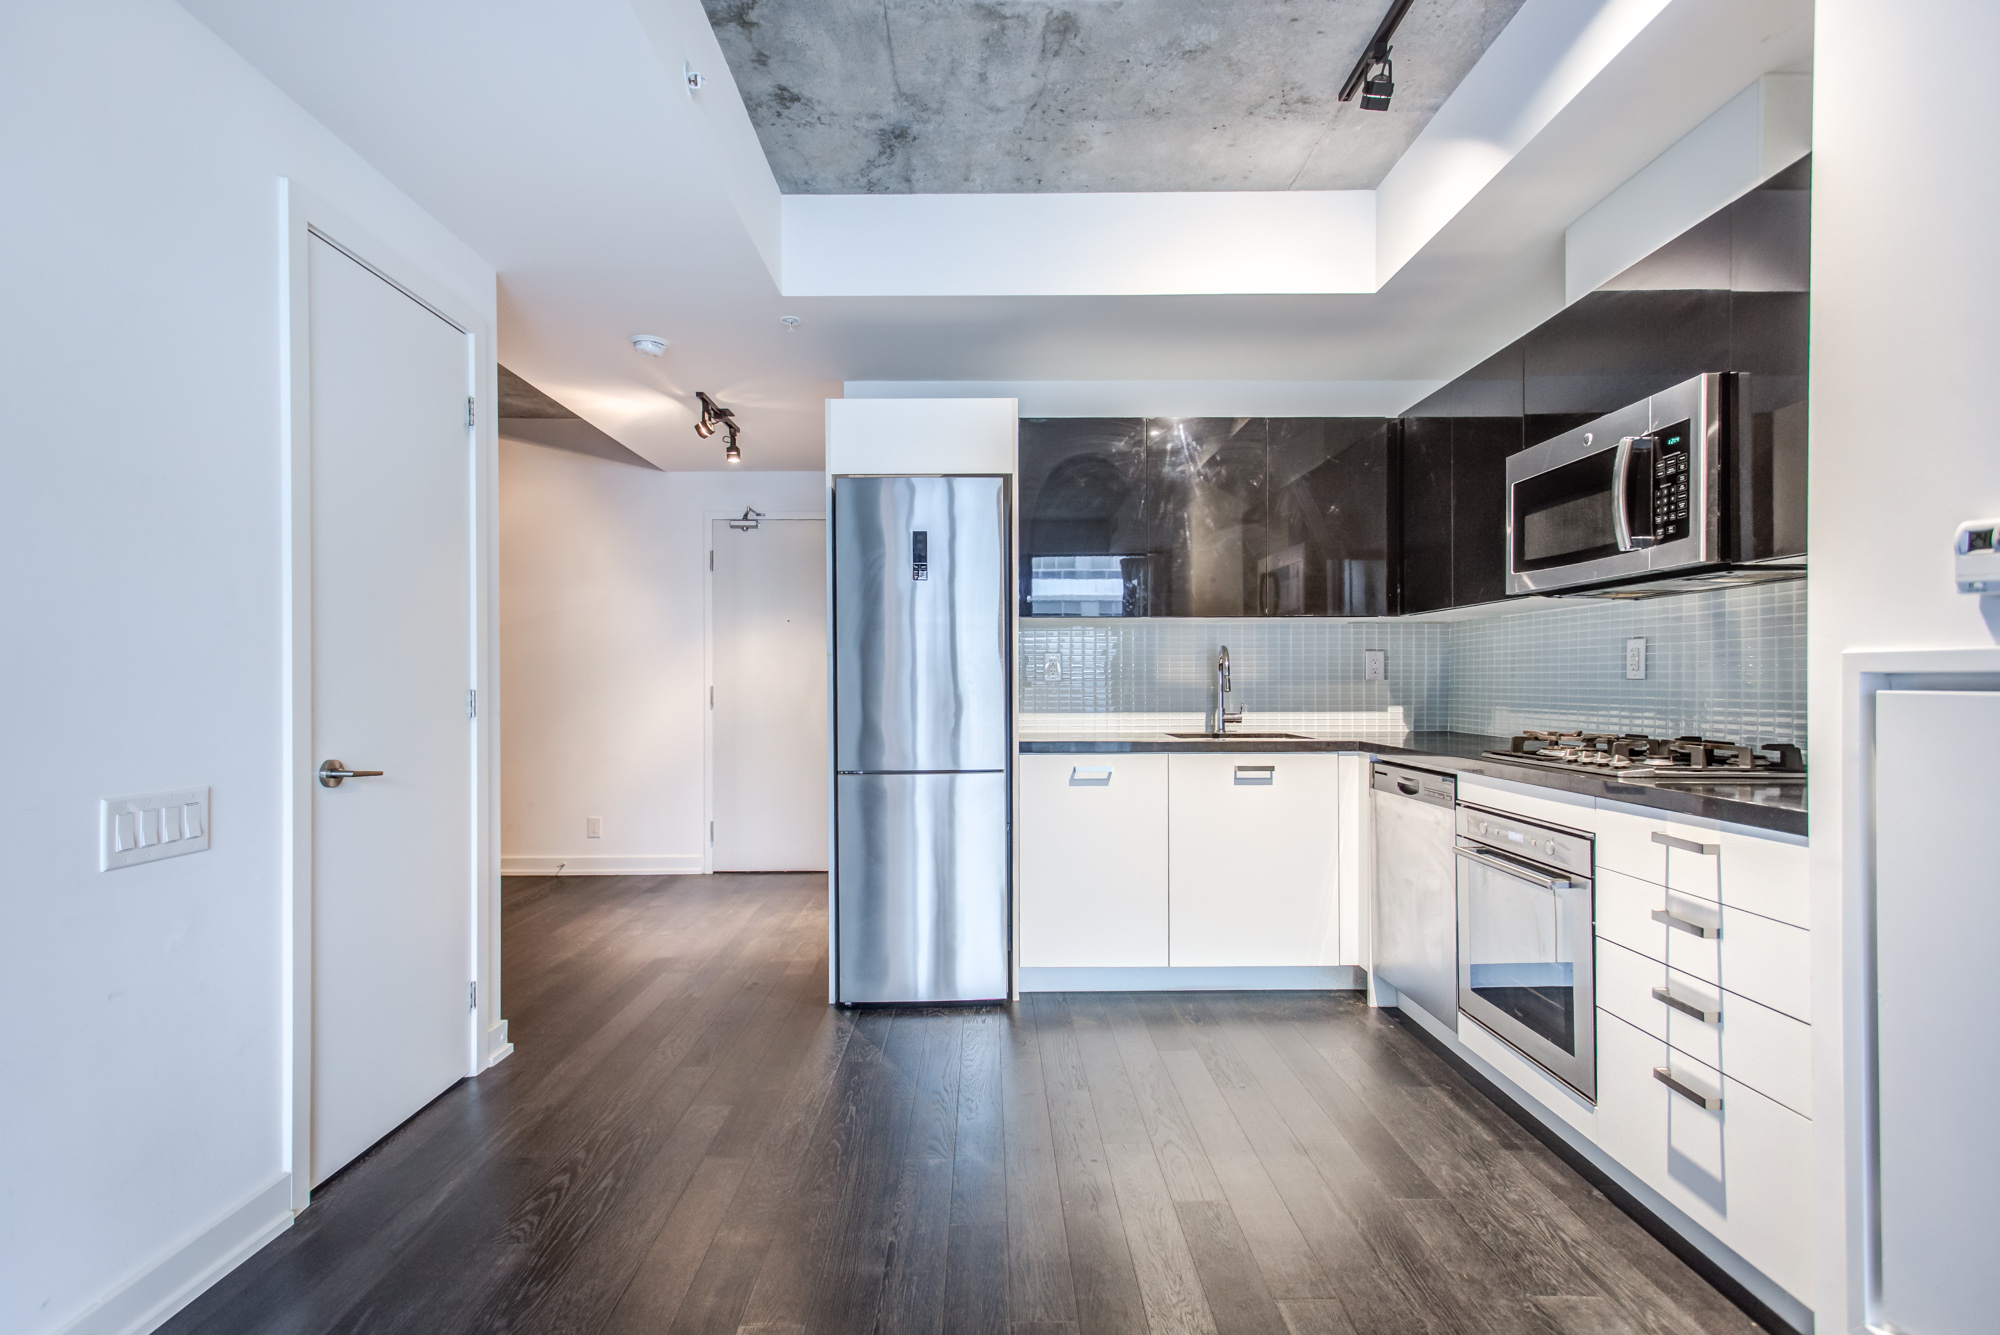 L-shaped kitchen with modern appliances at 39 Brant St Unit 918, Brant Park Lofts, in Queen West.